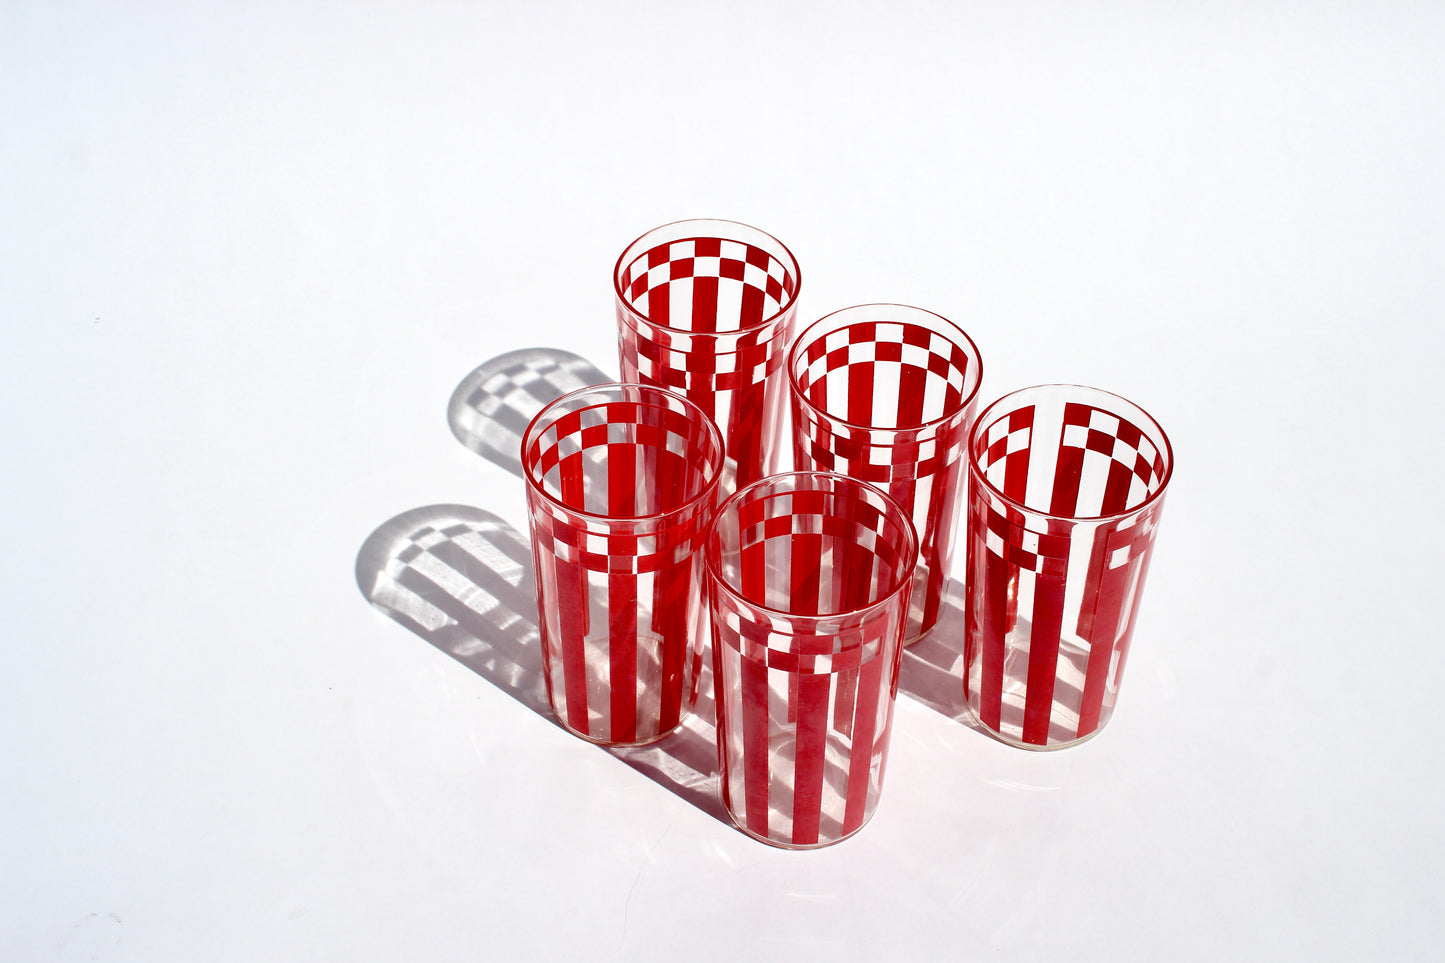 patterned tumblers